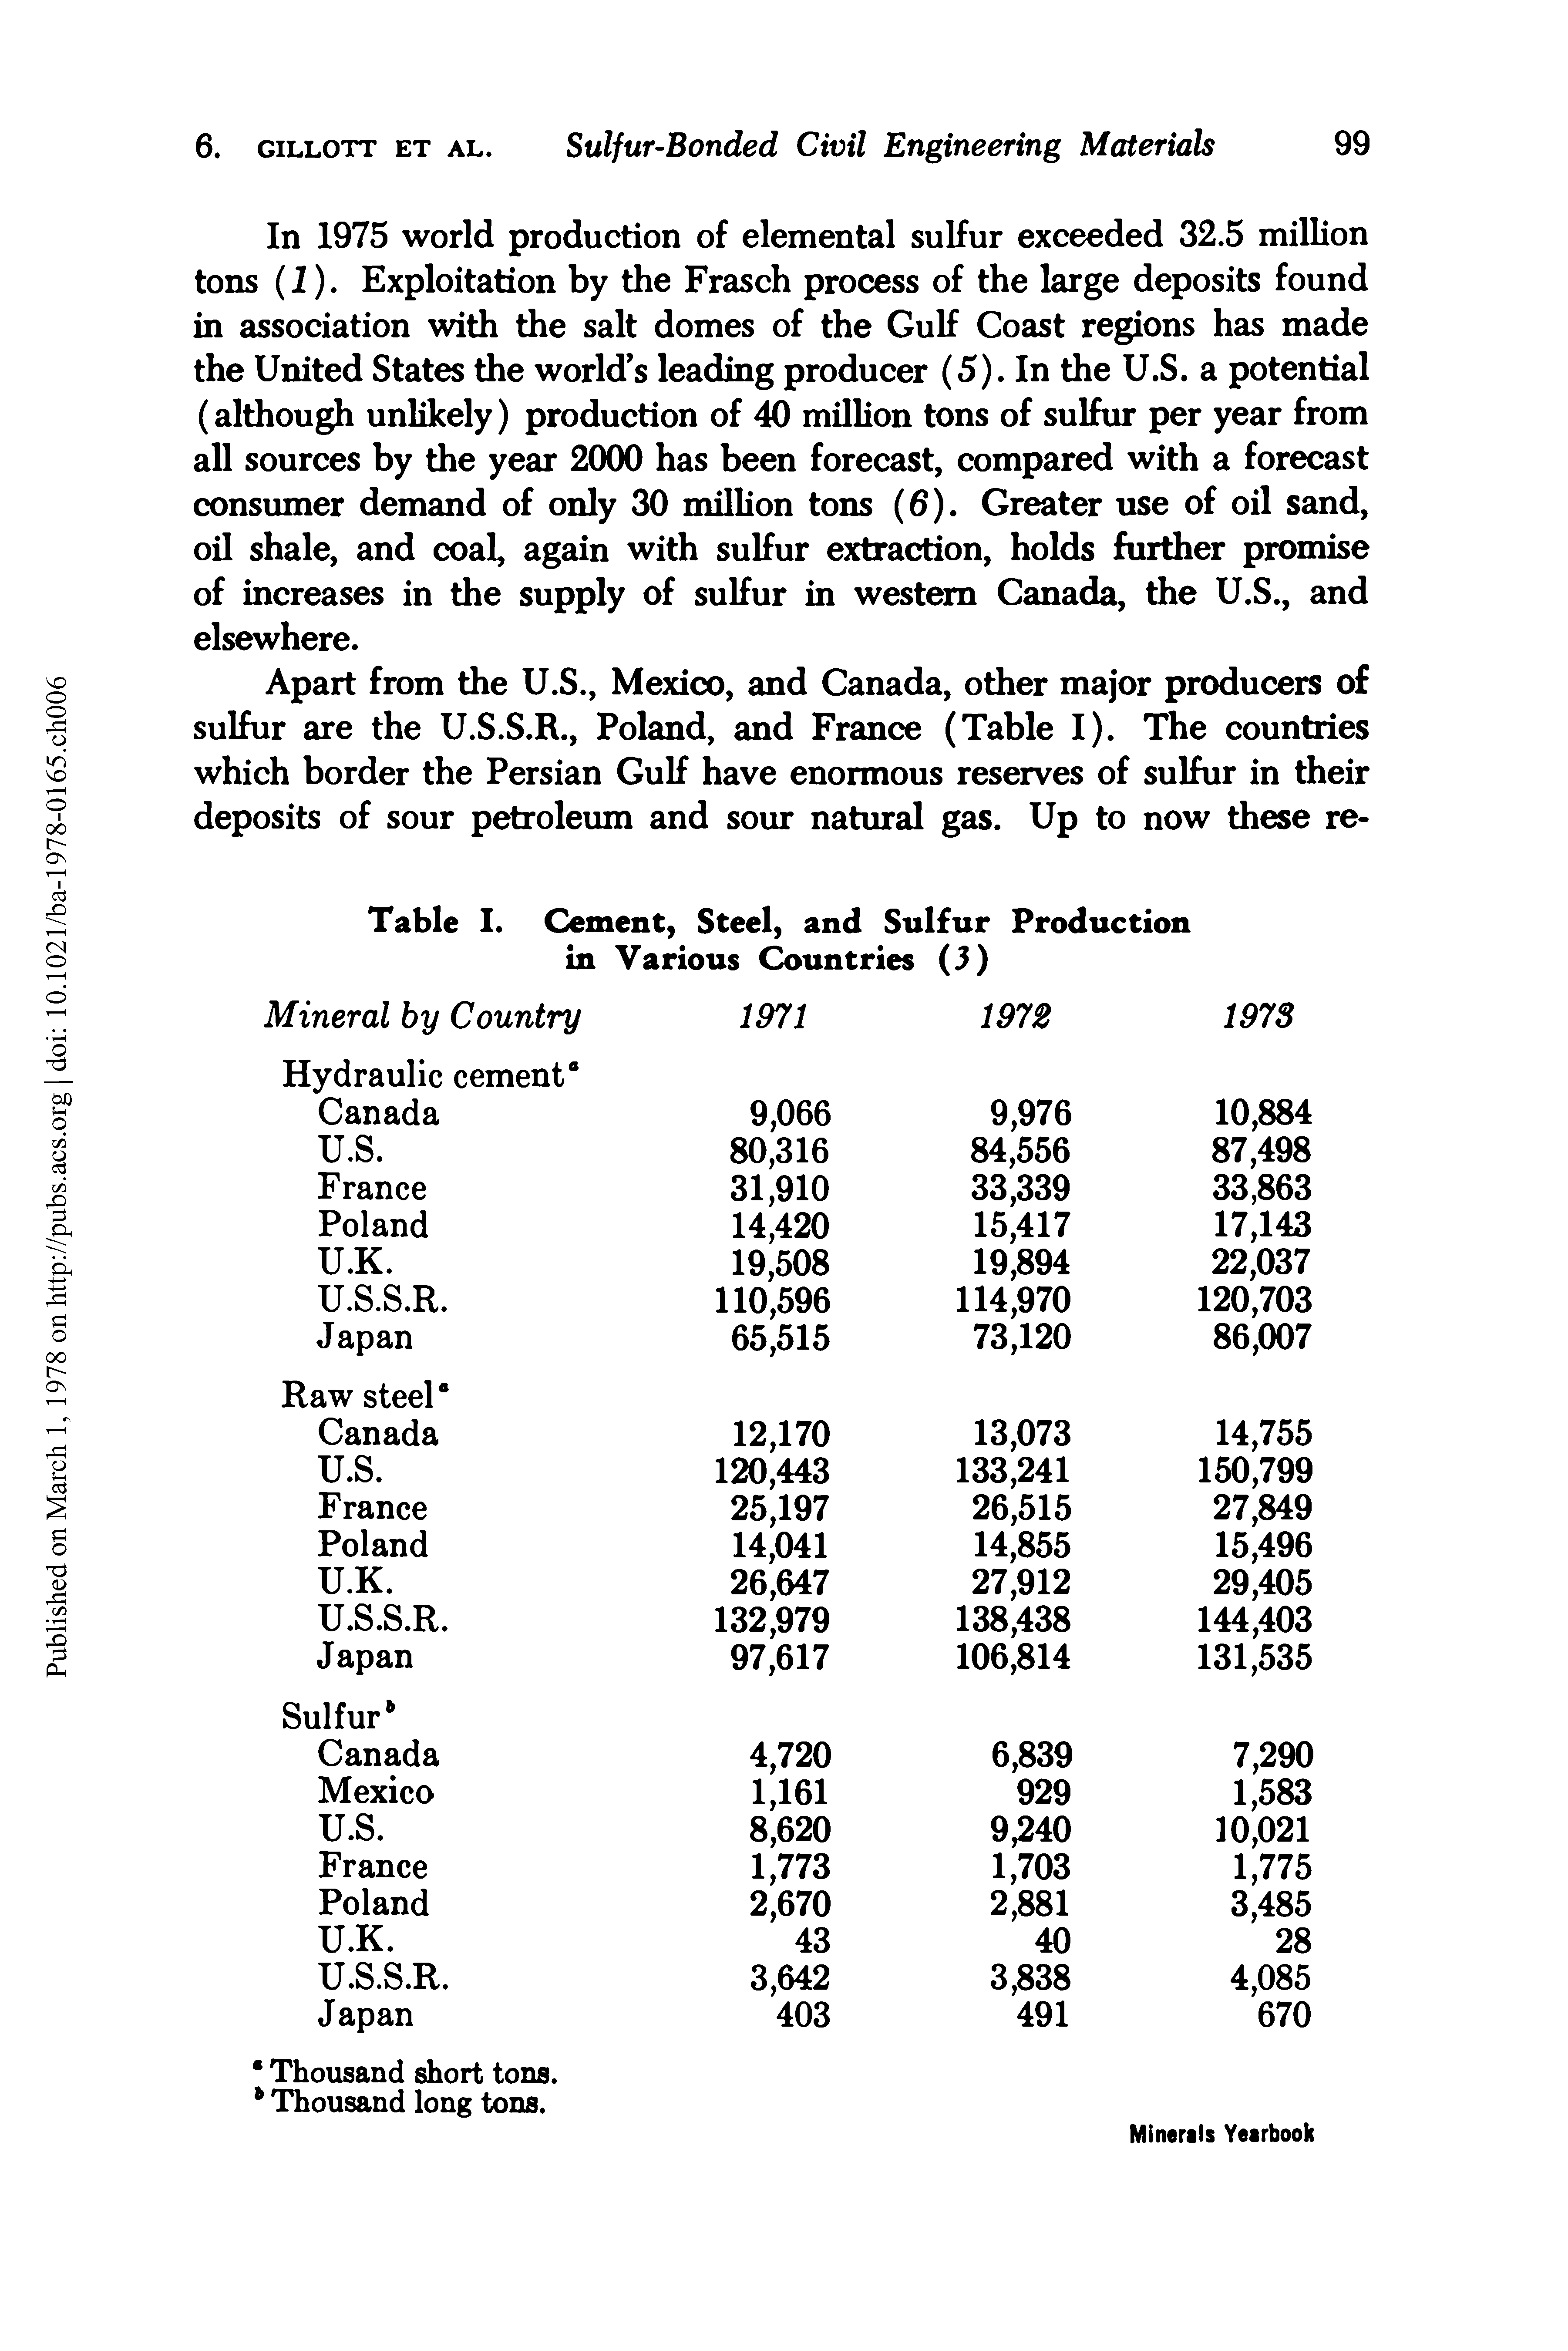 Table I. Cement, Steel, and Sulfur Production in Various Countries (3)...